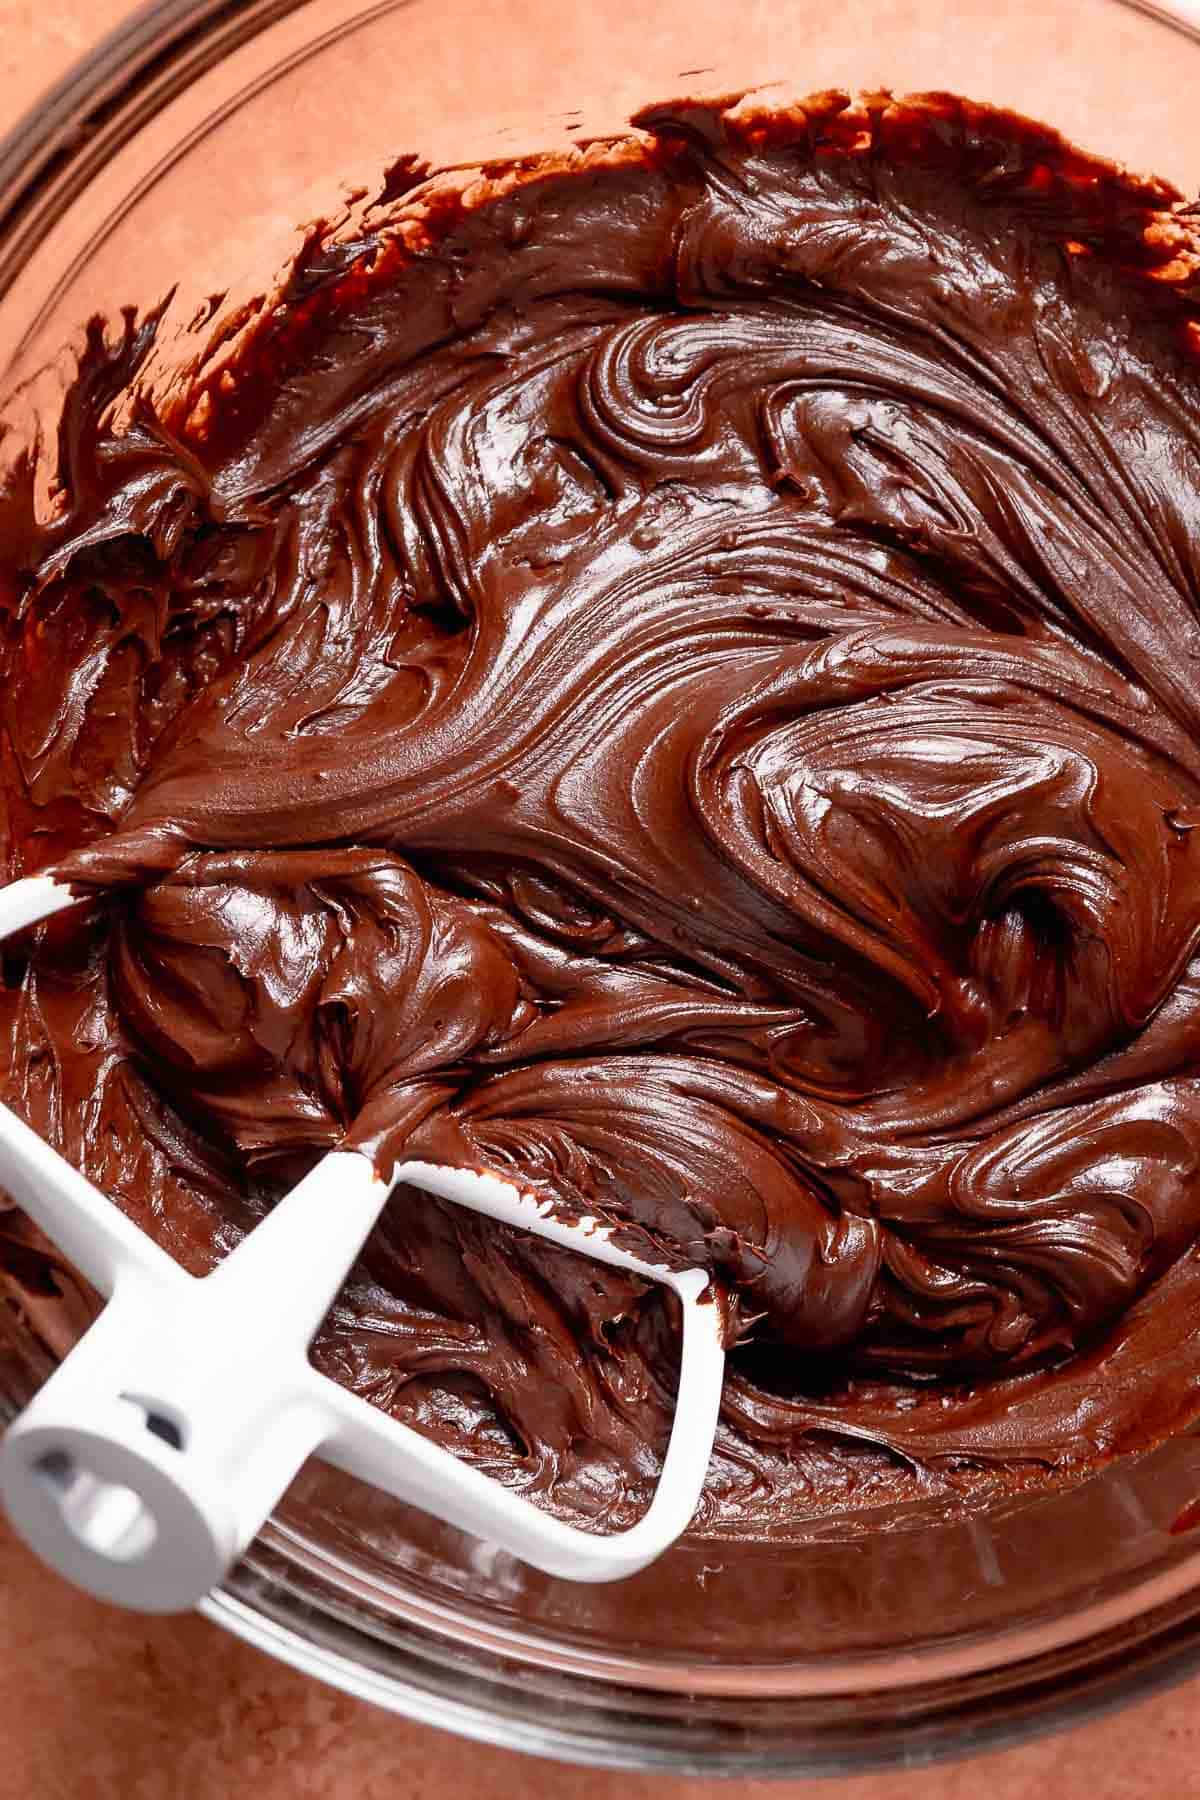 A bowl of chocolate fudge frosting.